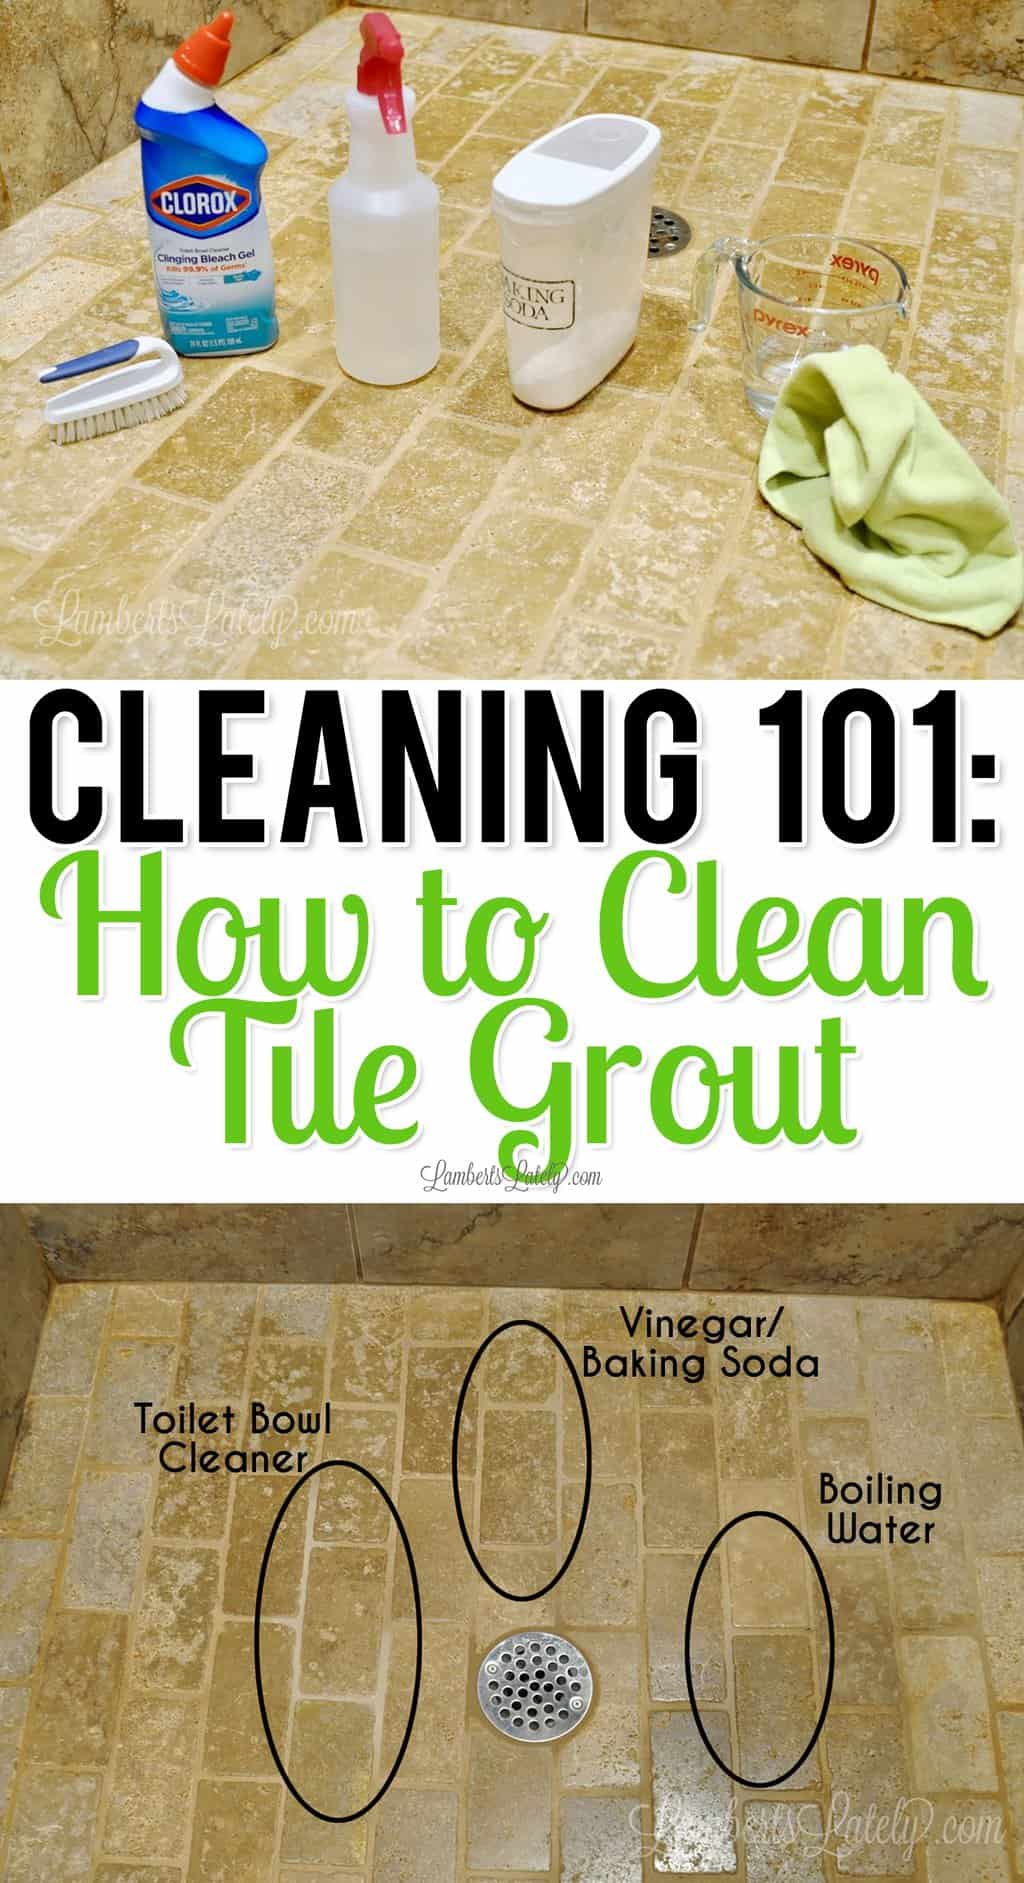 This post looks at a few of the popular ways to clean tile grout (baking soda and vinegar, bleach toilet bowl cleaner, and boiling water) to see which one really works best. Learn how to clean grout the effective way!